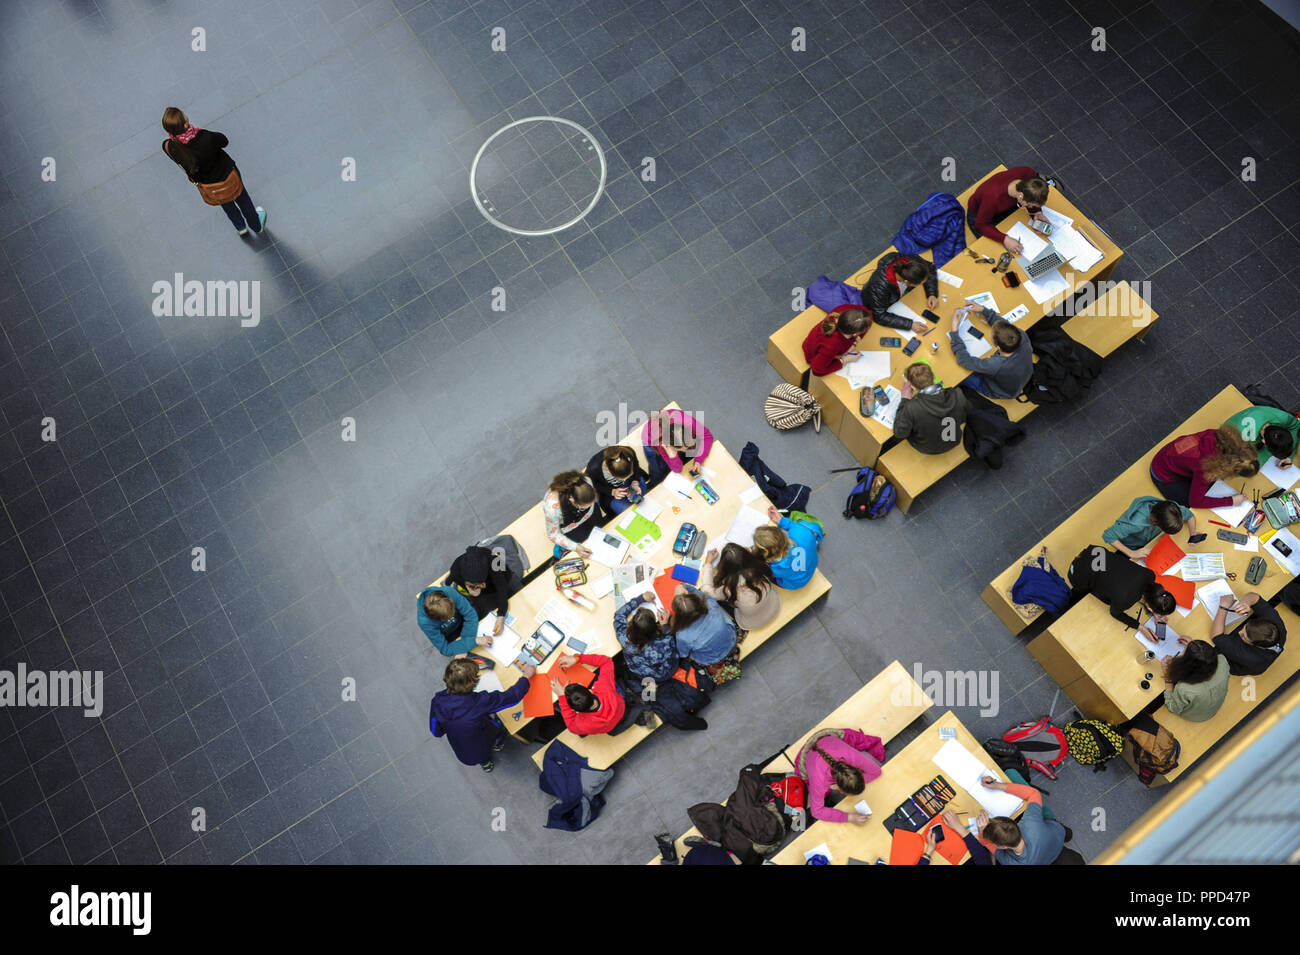 Day of Mathematics at the TU Campus Garching: in the image students are solving arithmetic problems in the building of the Faculty of Mathematics. Stock Photo